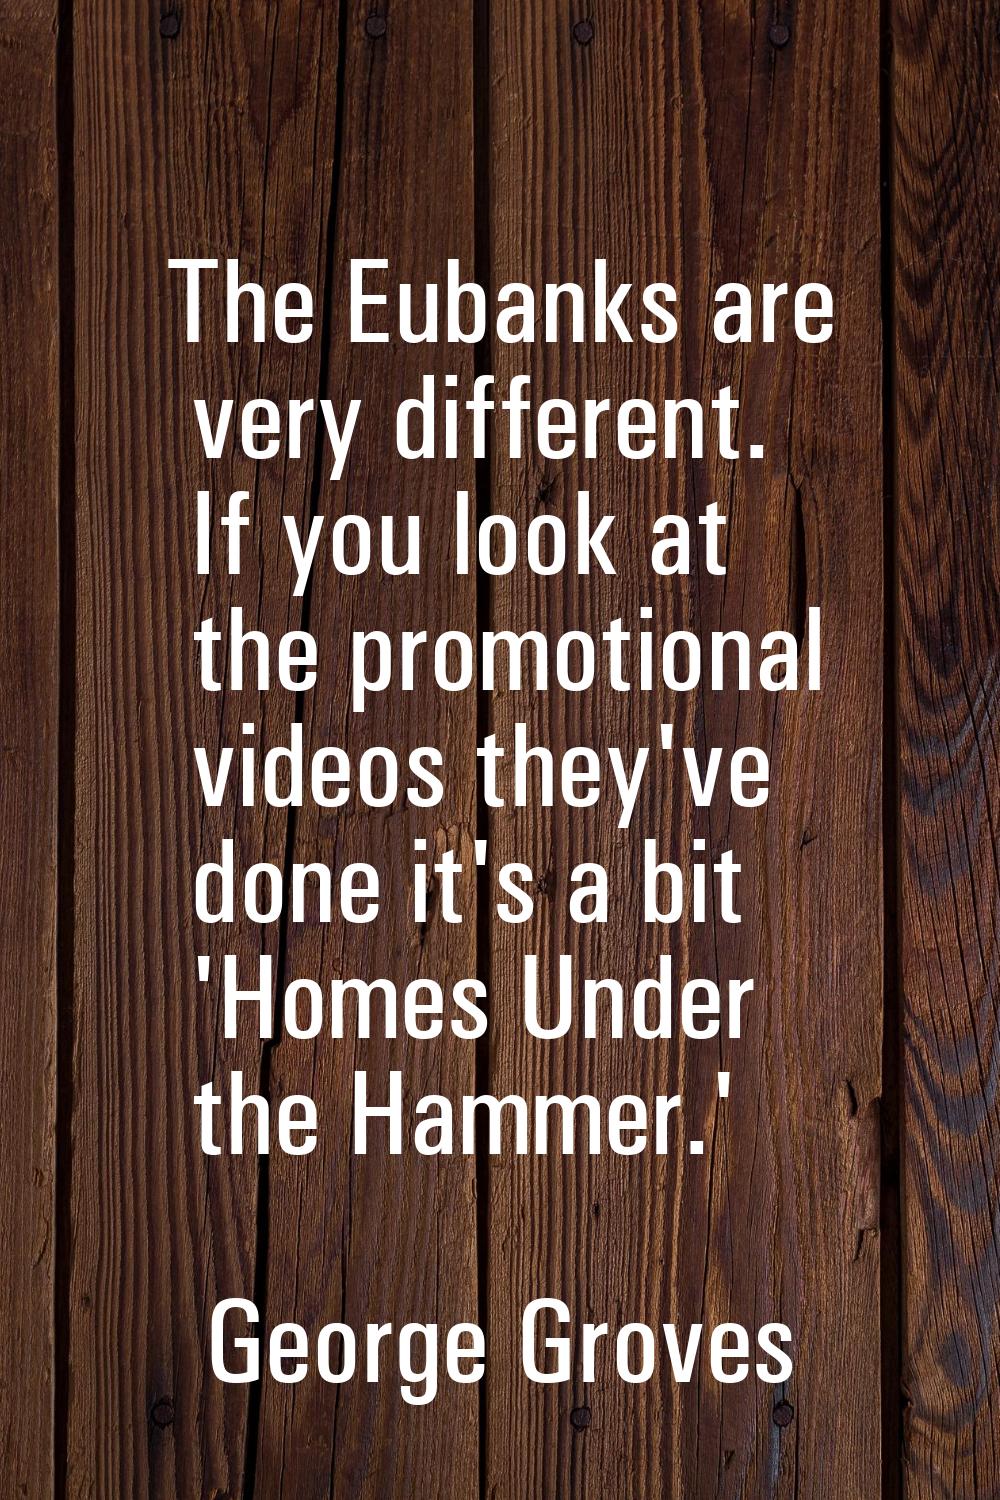 The Eubanks are very different. If you look at the promotional videos they've done it's a bit 'Home